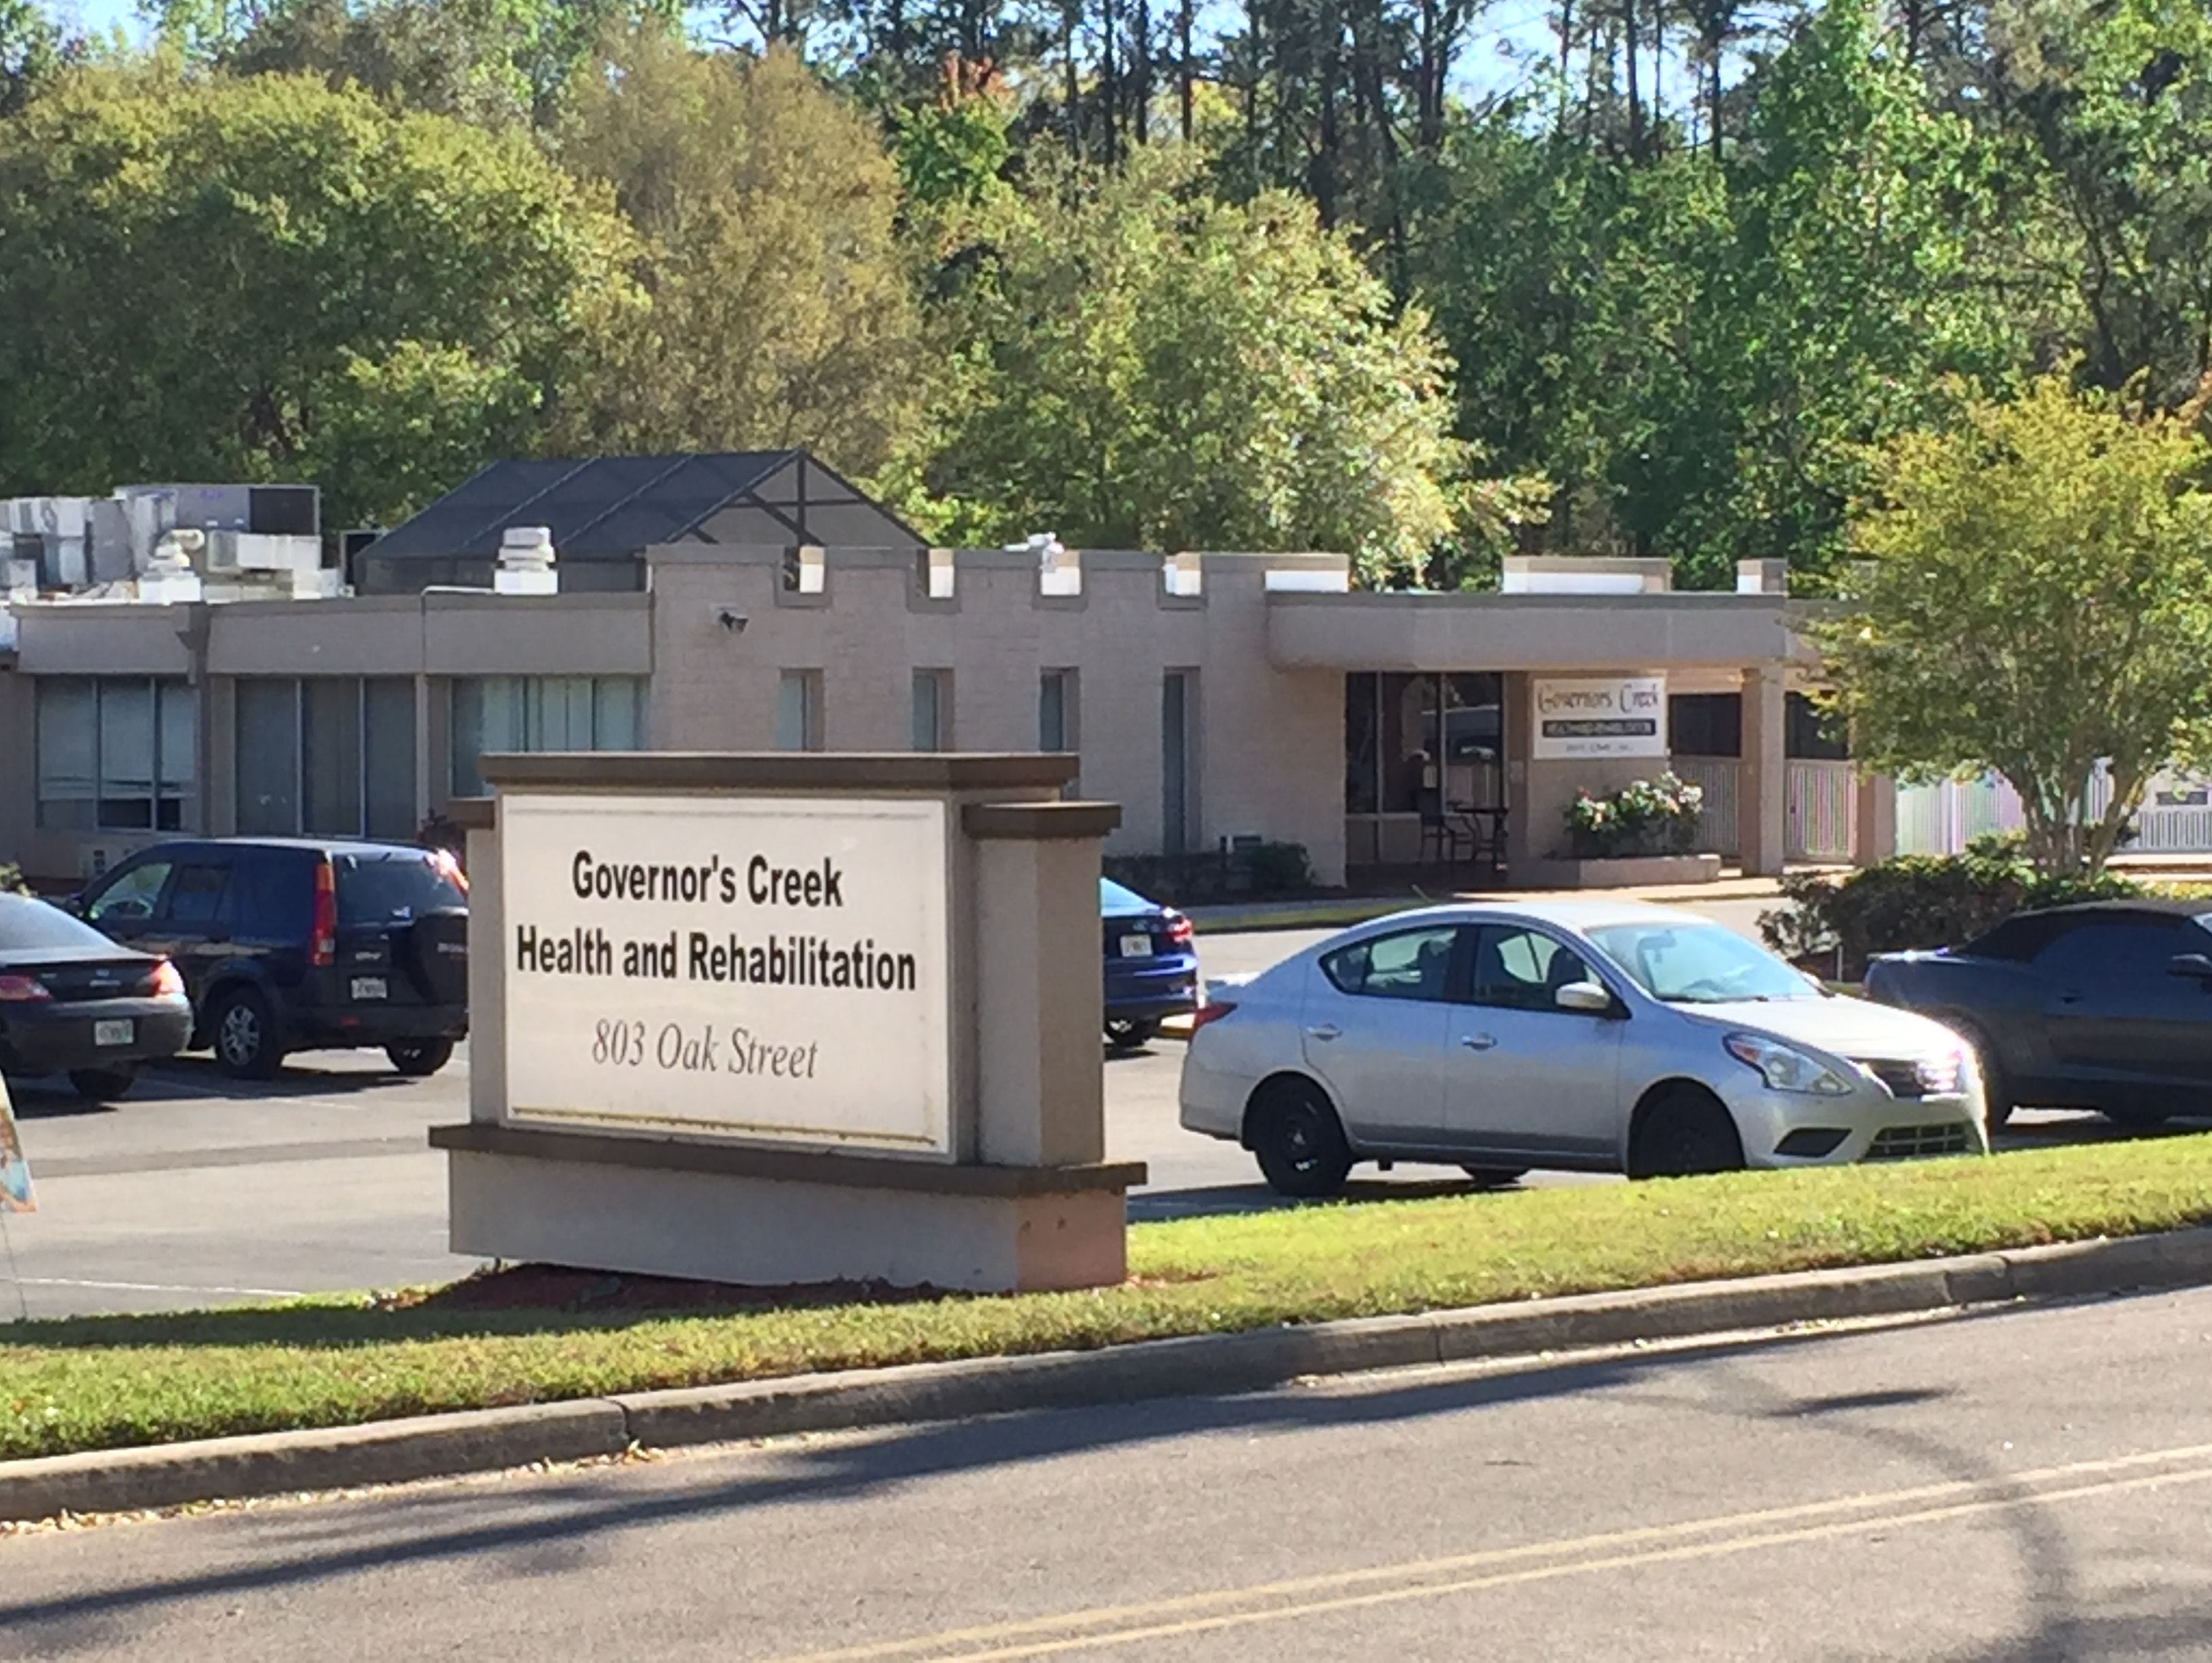 Governors Creek Health and Rehabilitation in Green Cove Springs is one of two Consulate Health Care nursing homes at the center of a federal whistleblower lawsuit. The two homes are accused of putting profits over patients.